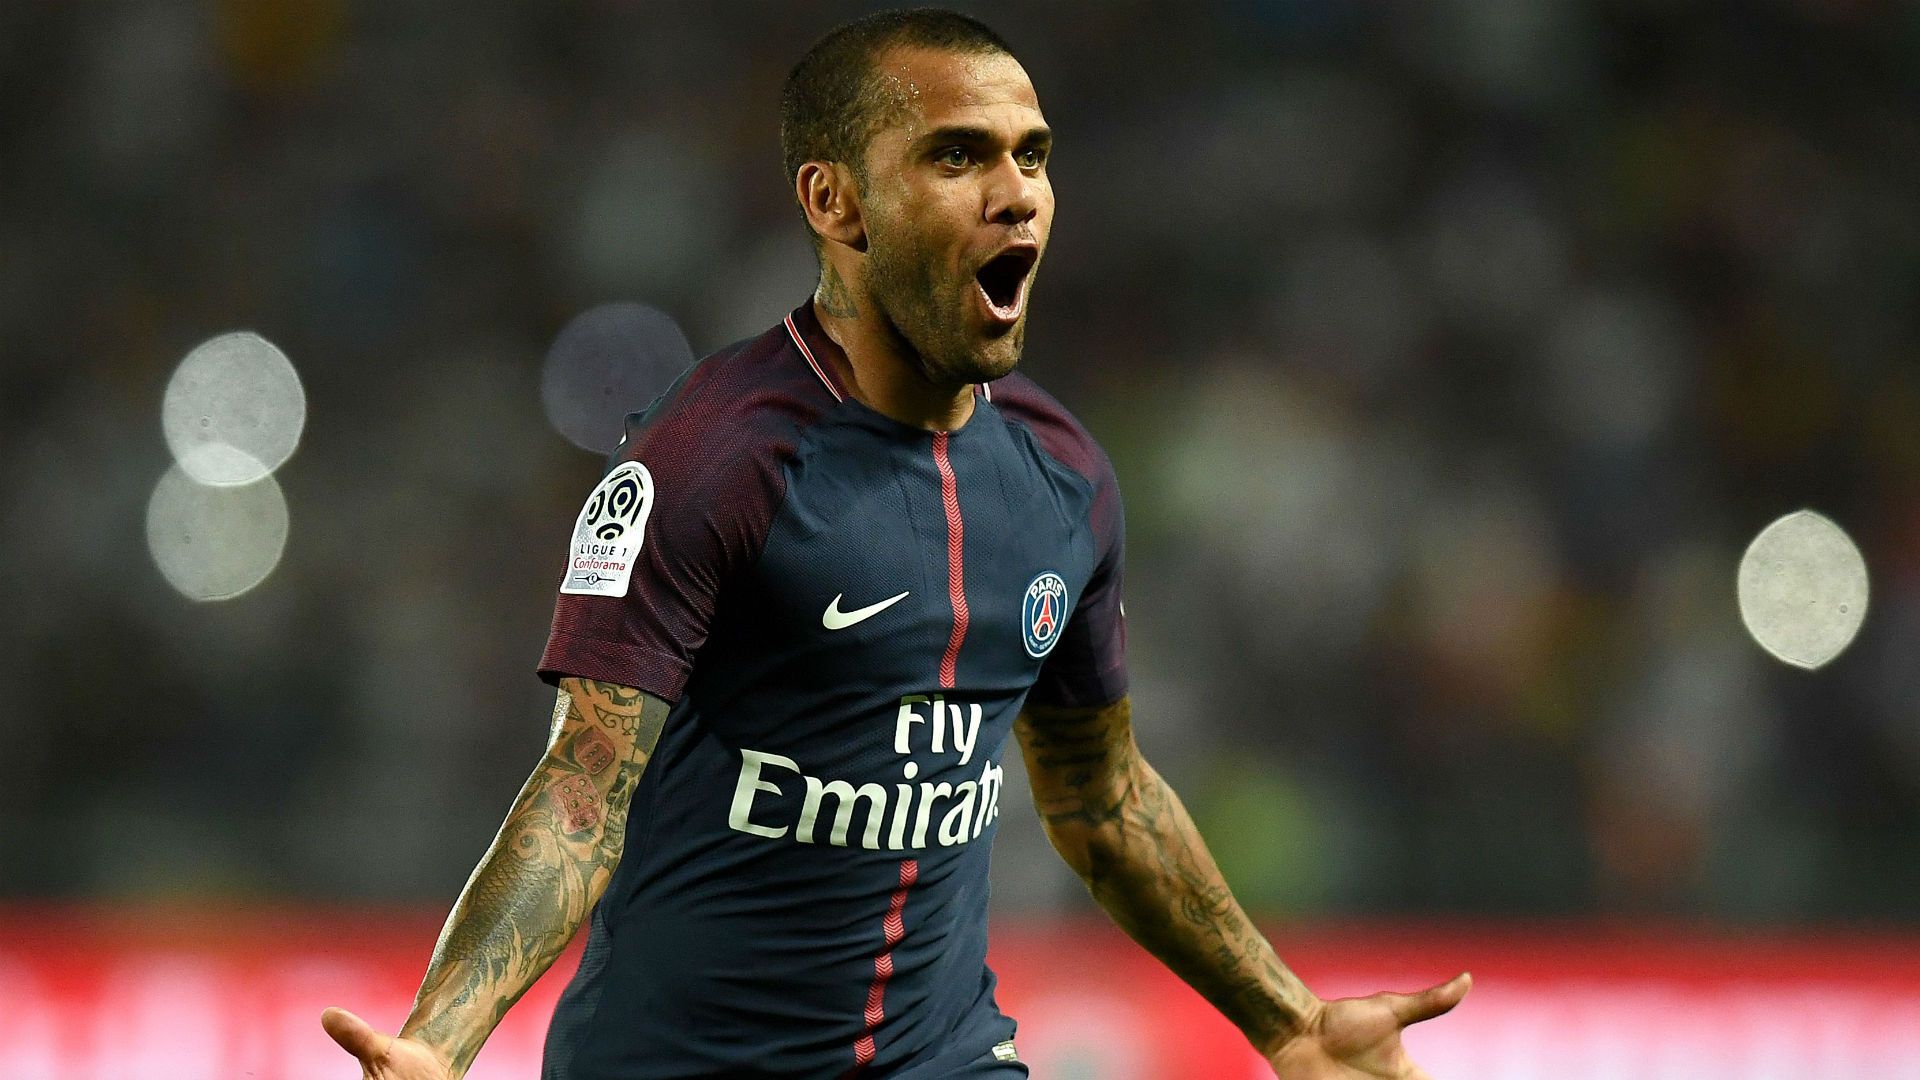 Daniel Alves biography, personal life, career, Net Worth, and Awards